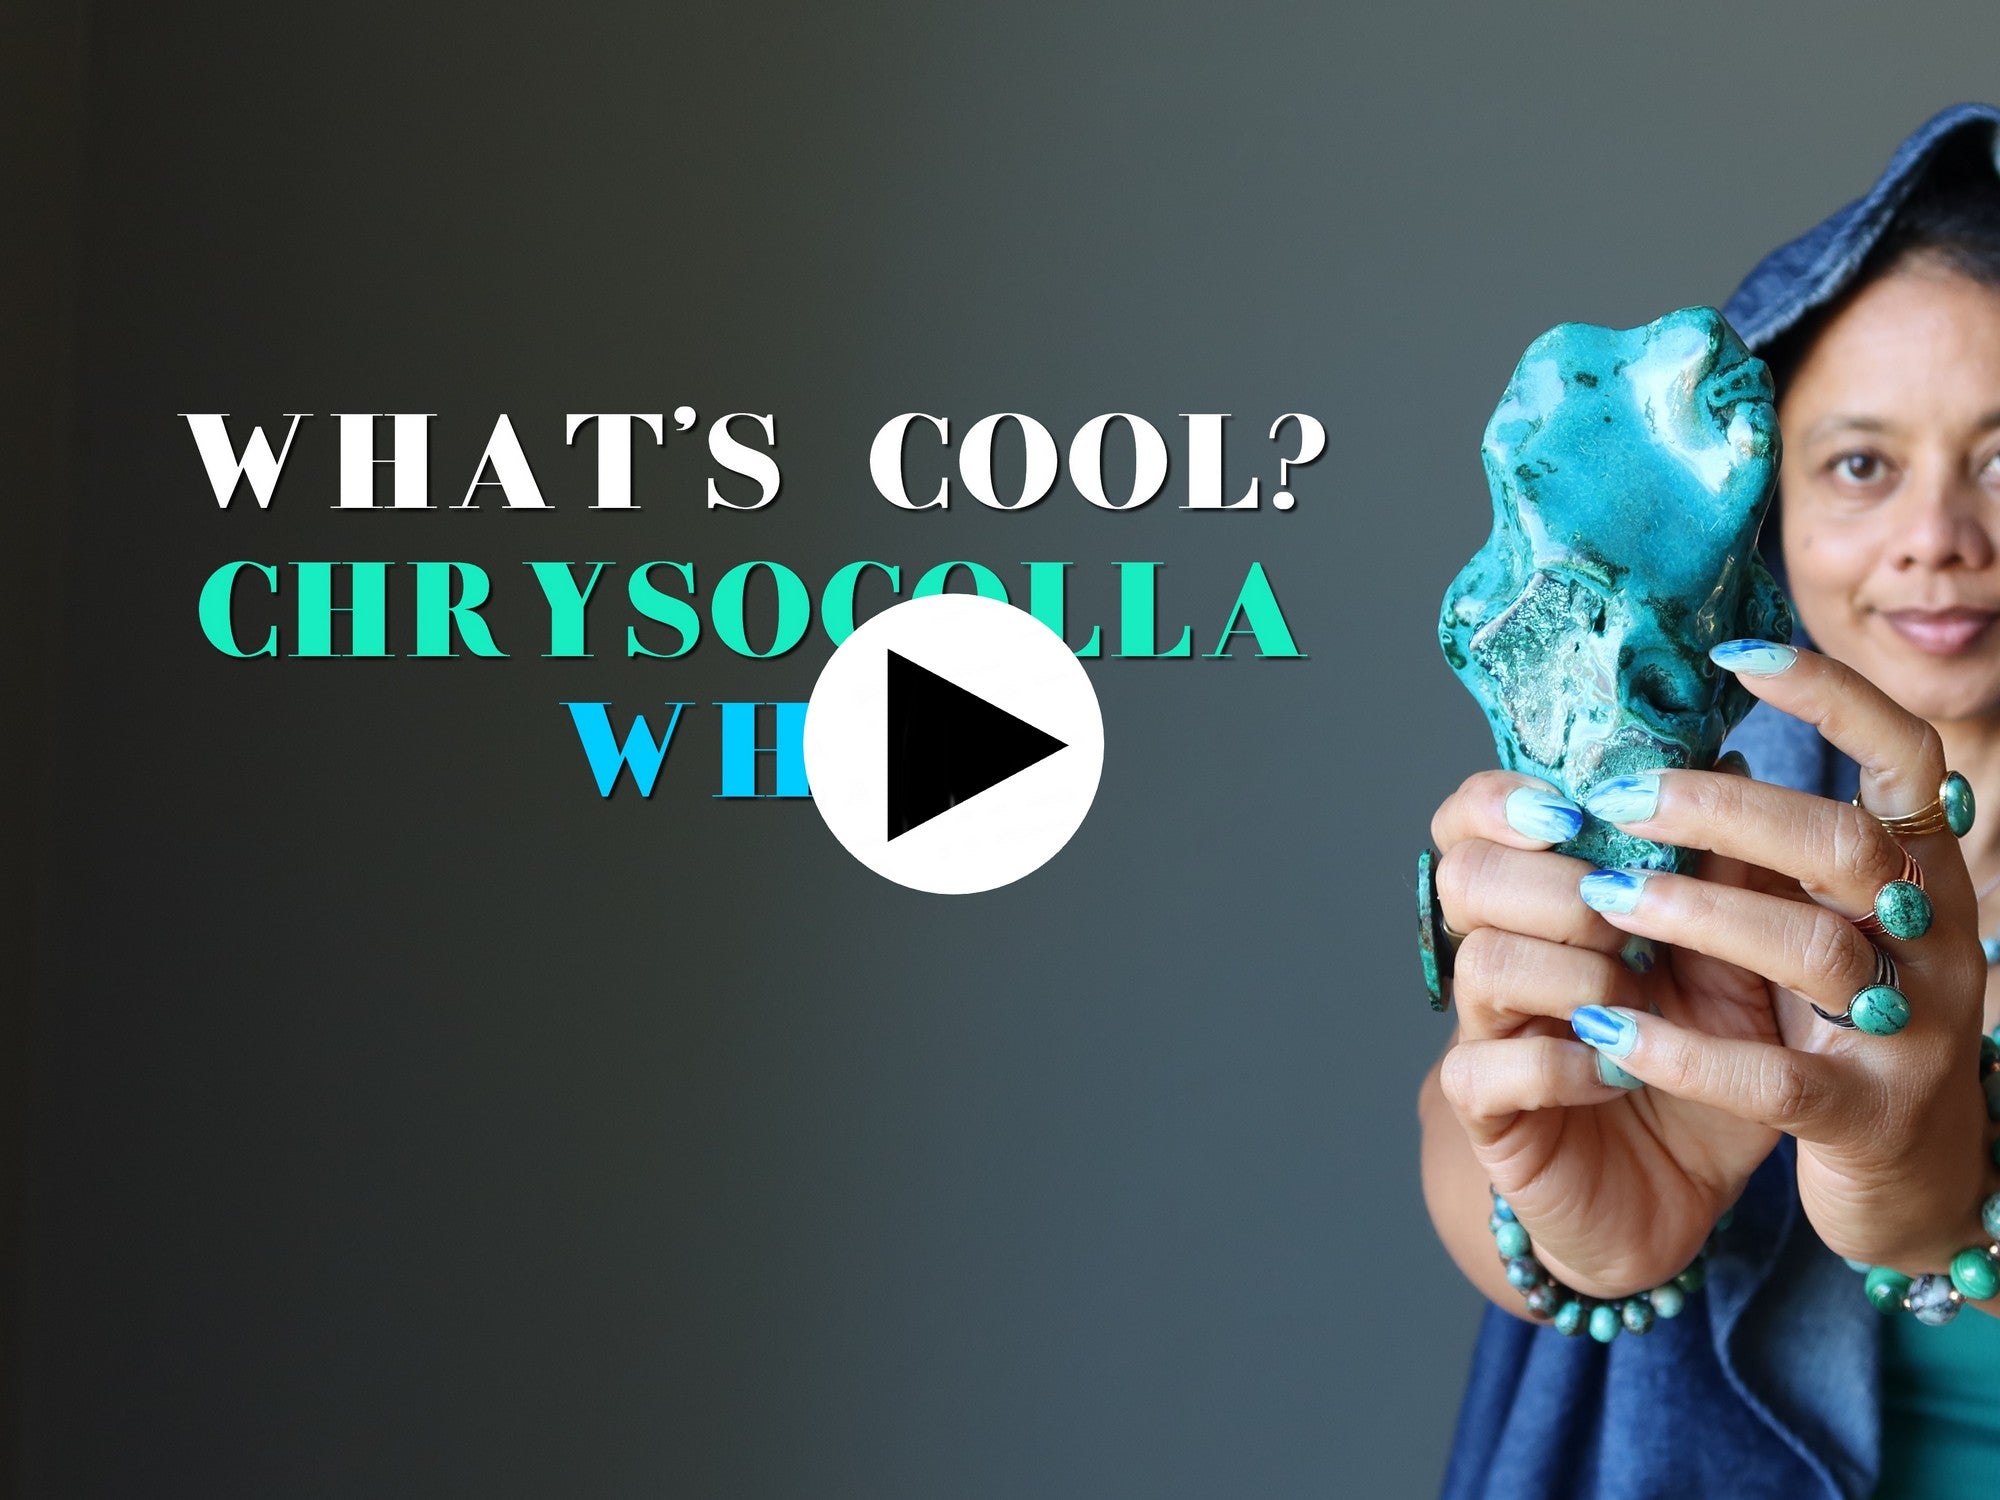 What is Chrysocolla? Video